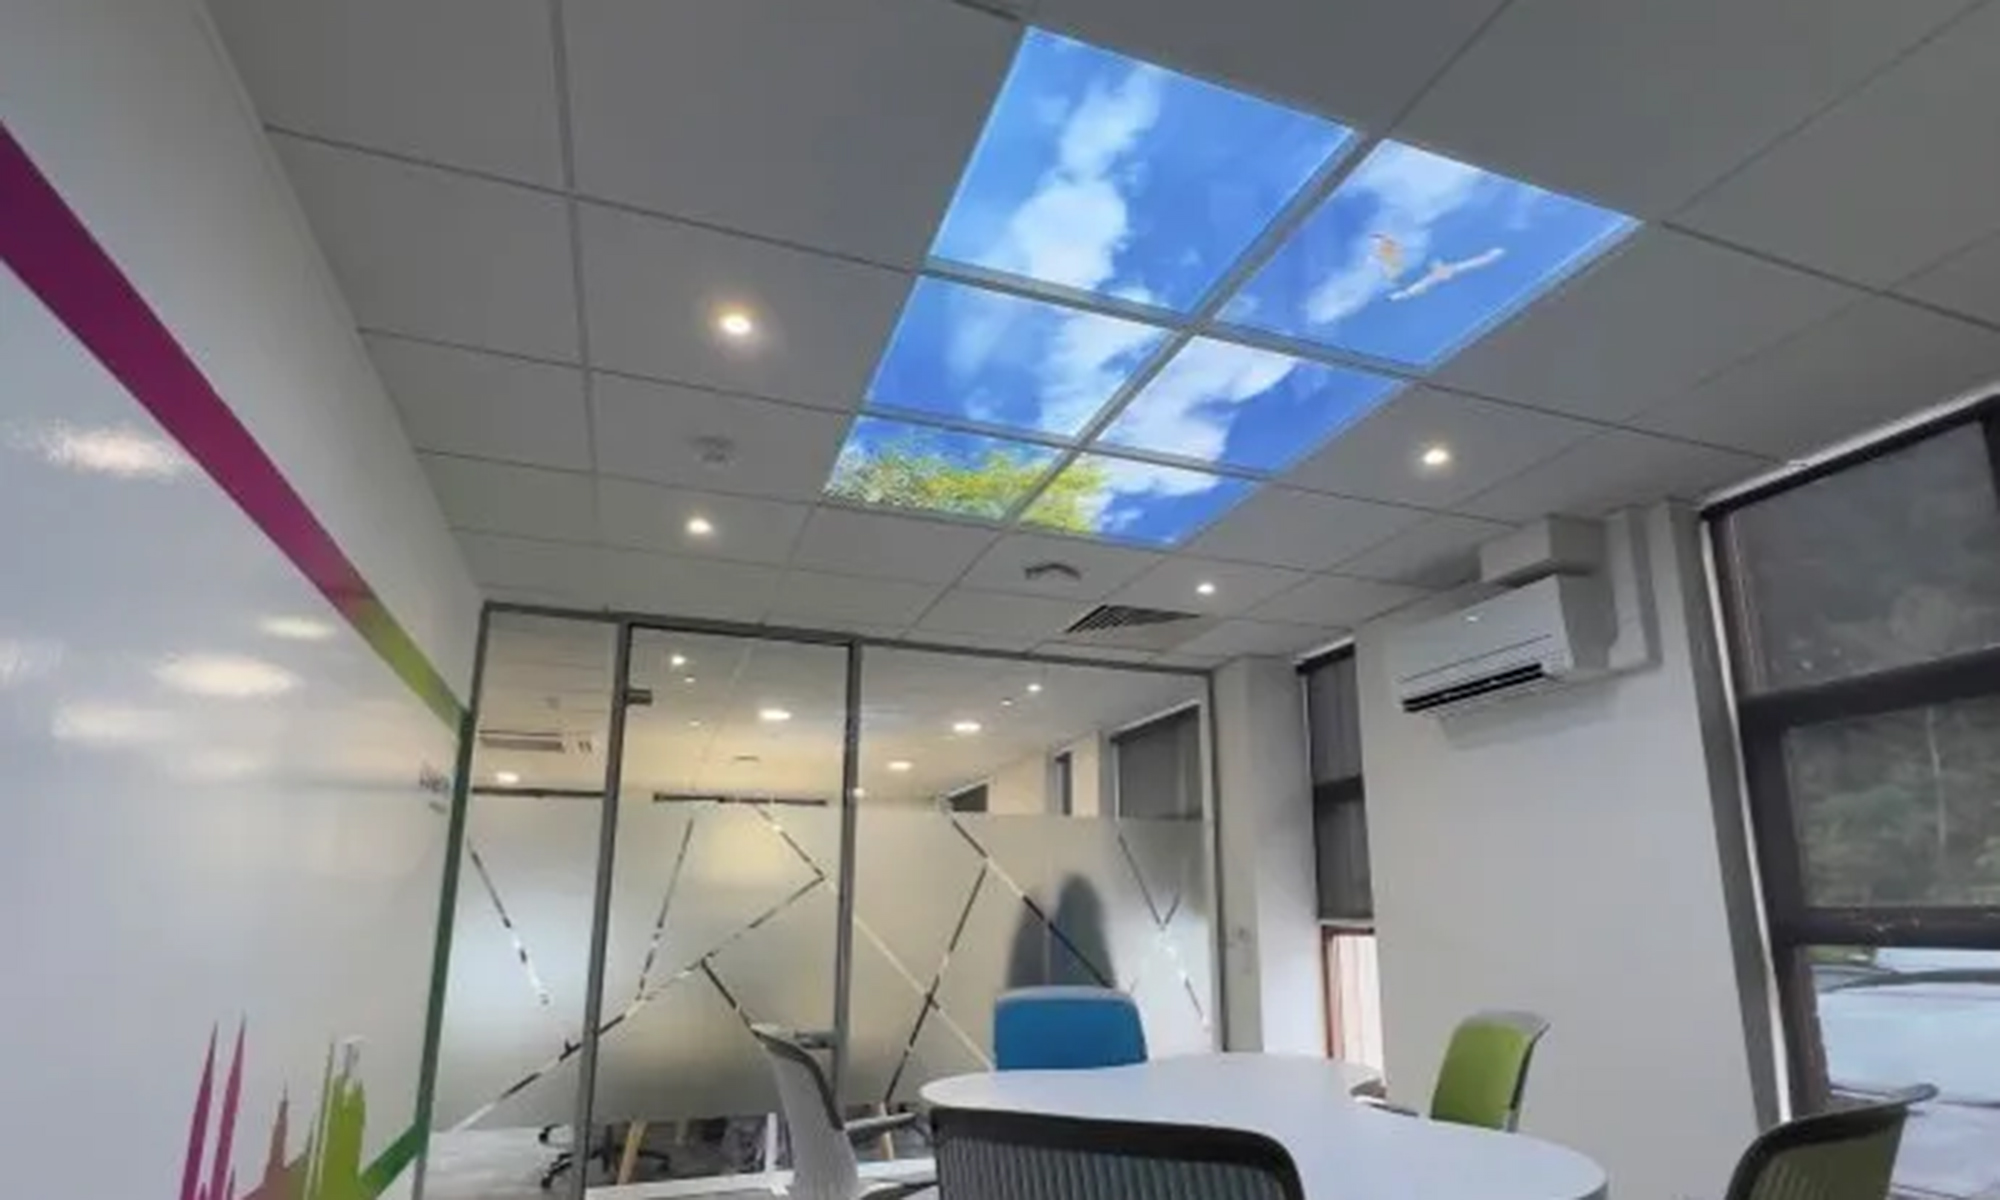 LED Illuminated Sky panels with clouds and birds flying